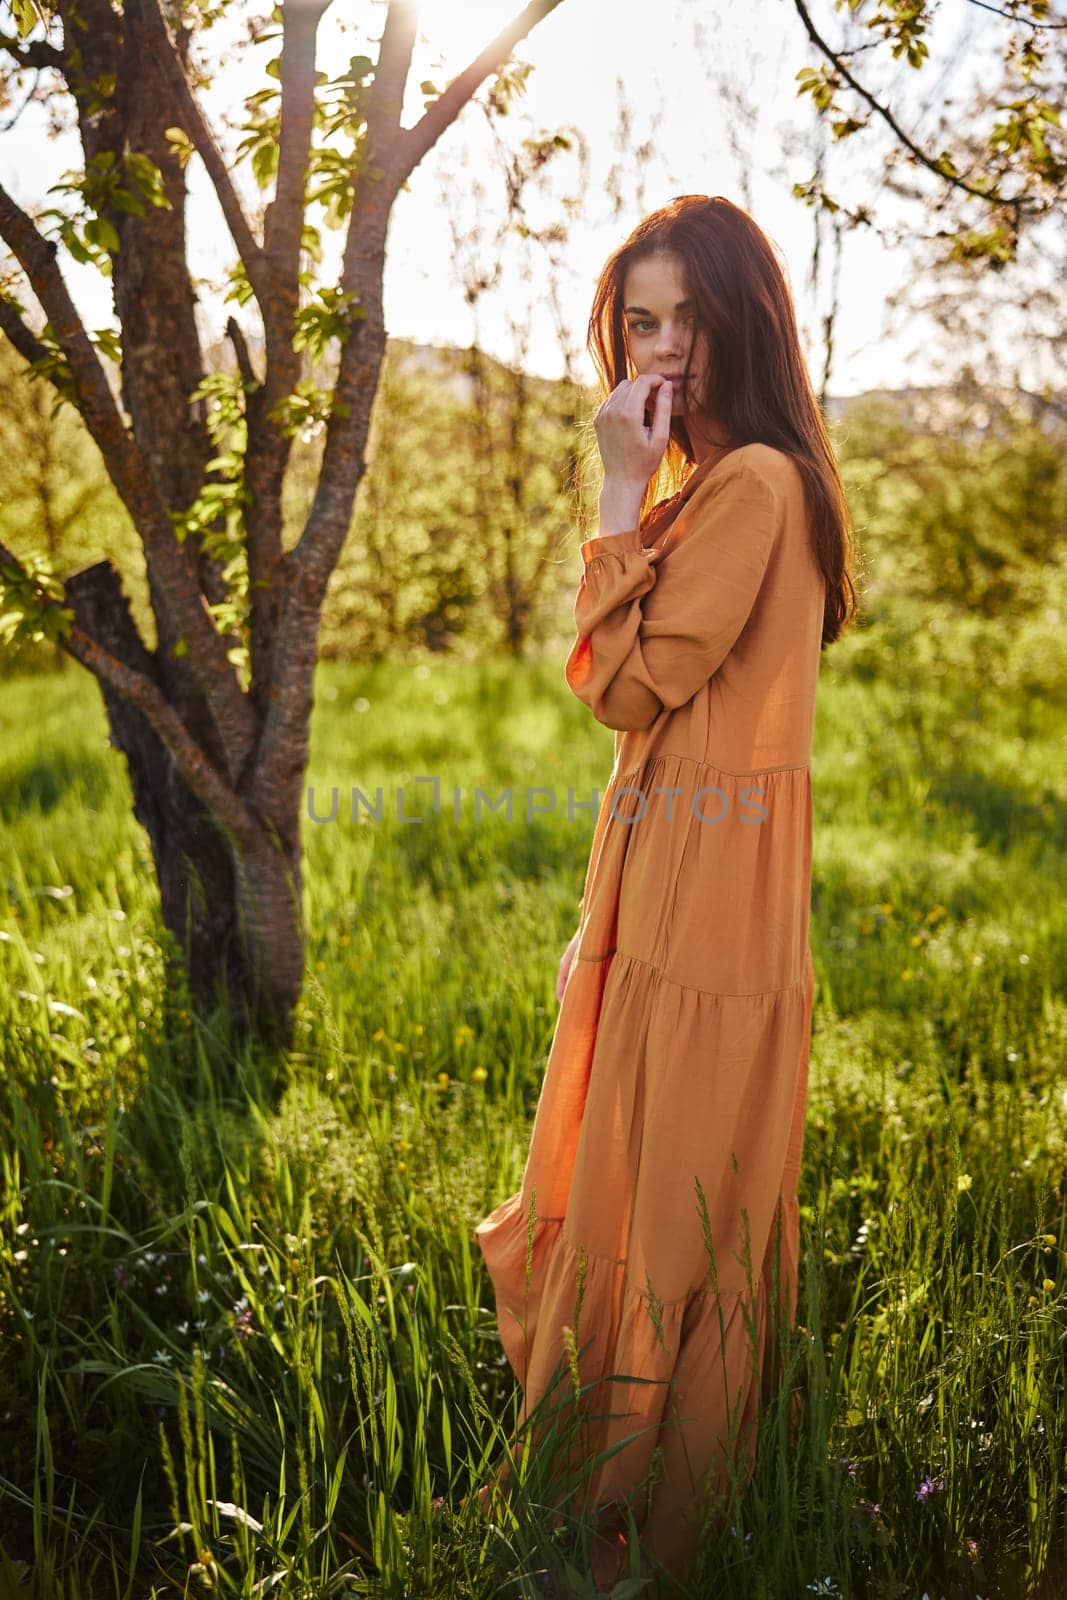 a sweet, thoughtful woman stands in nature near a tree in a long orange dress, illuminated from the back by the sunset rays of the sun and holding her hand near her face looks away. High quality photo